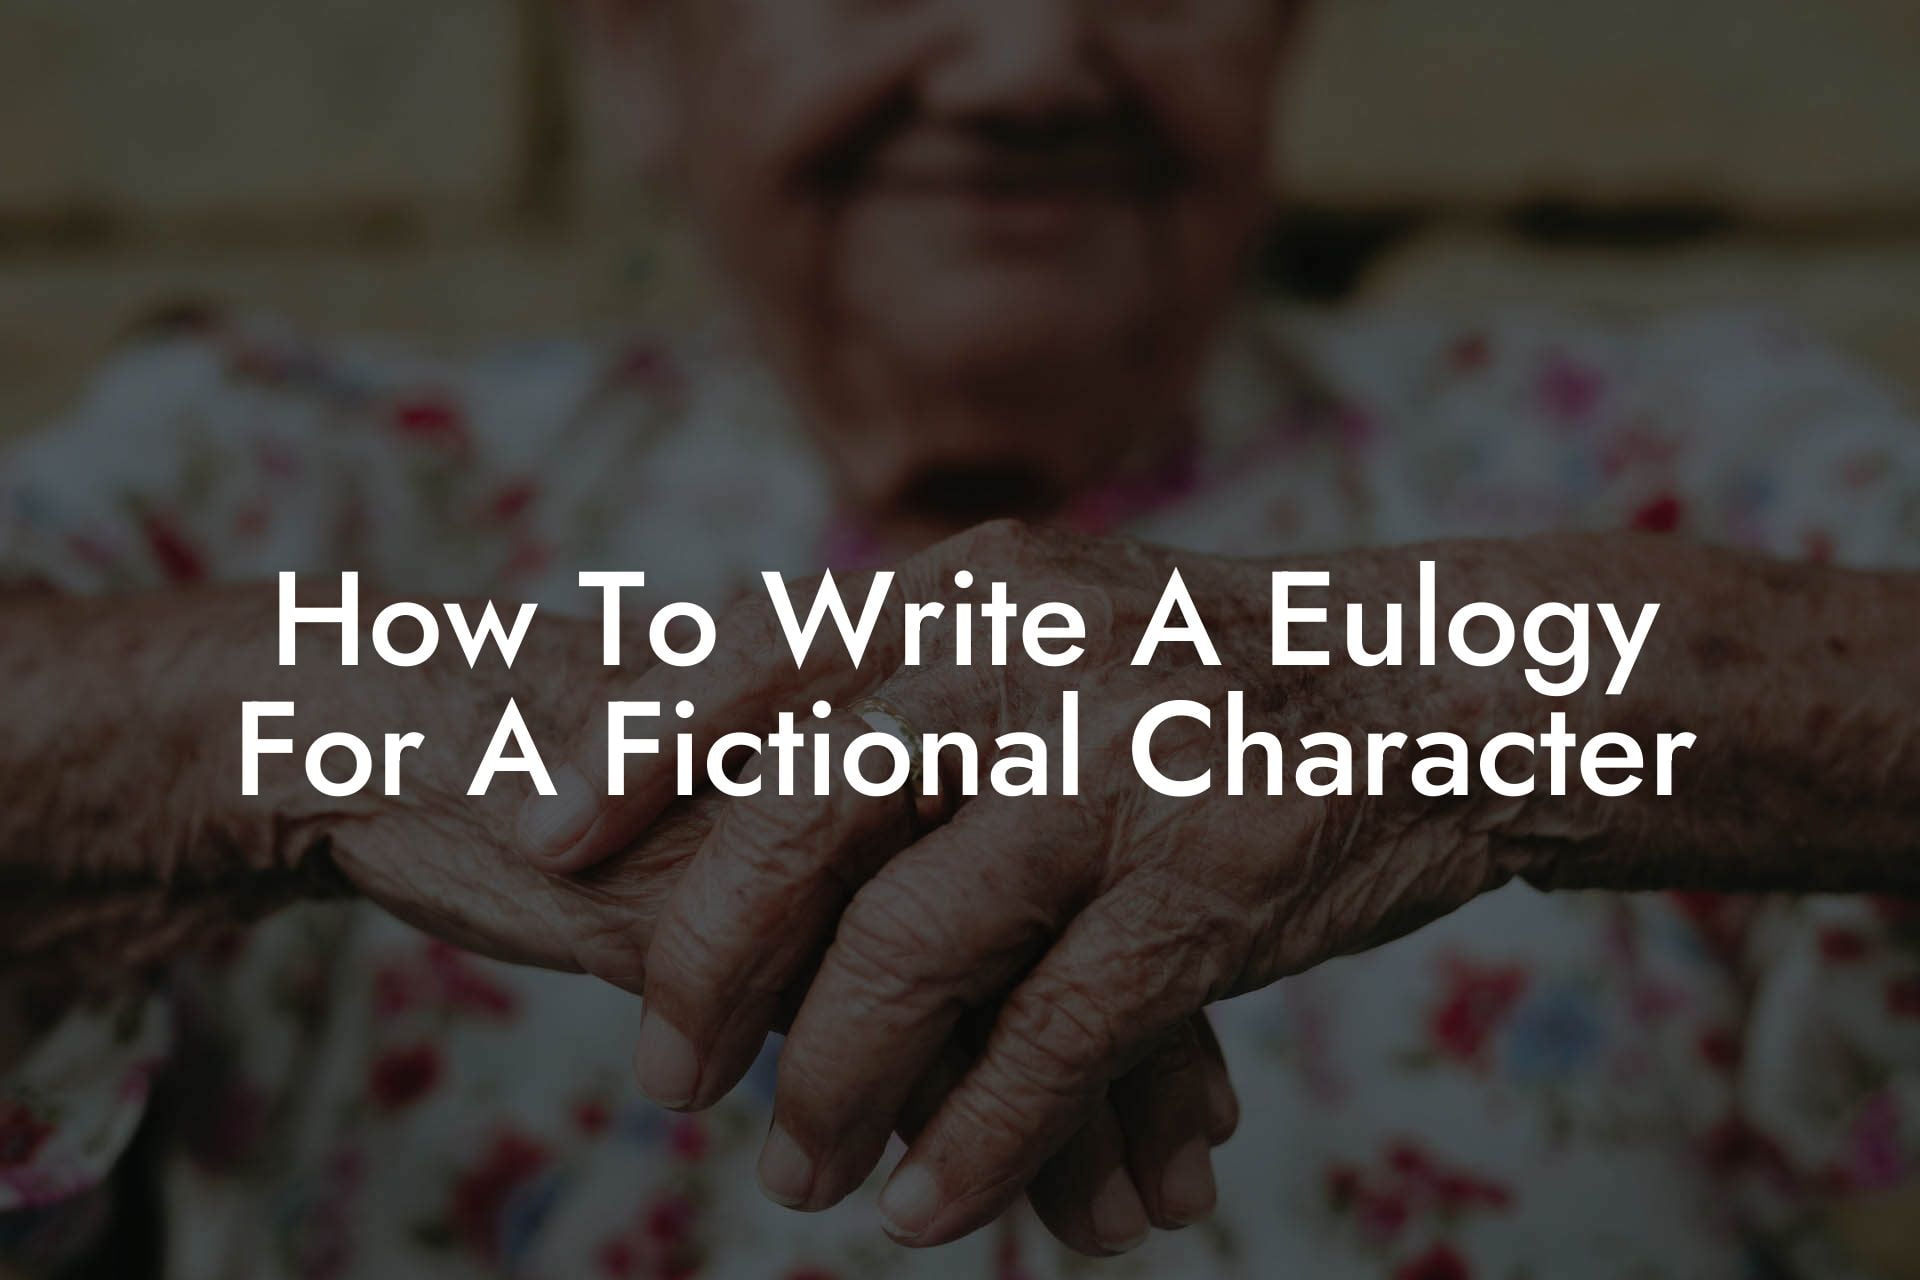 How To Write A Eulogy For A Fictional Character